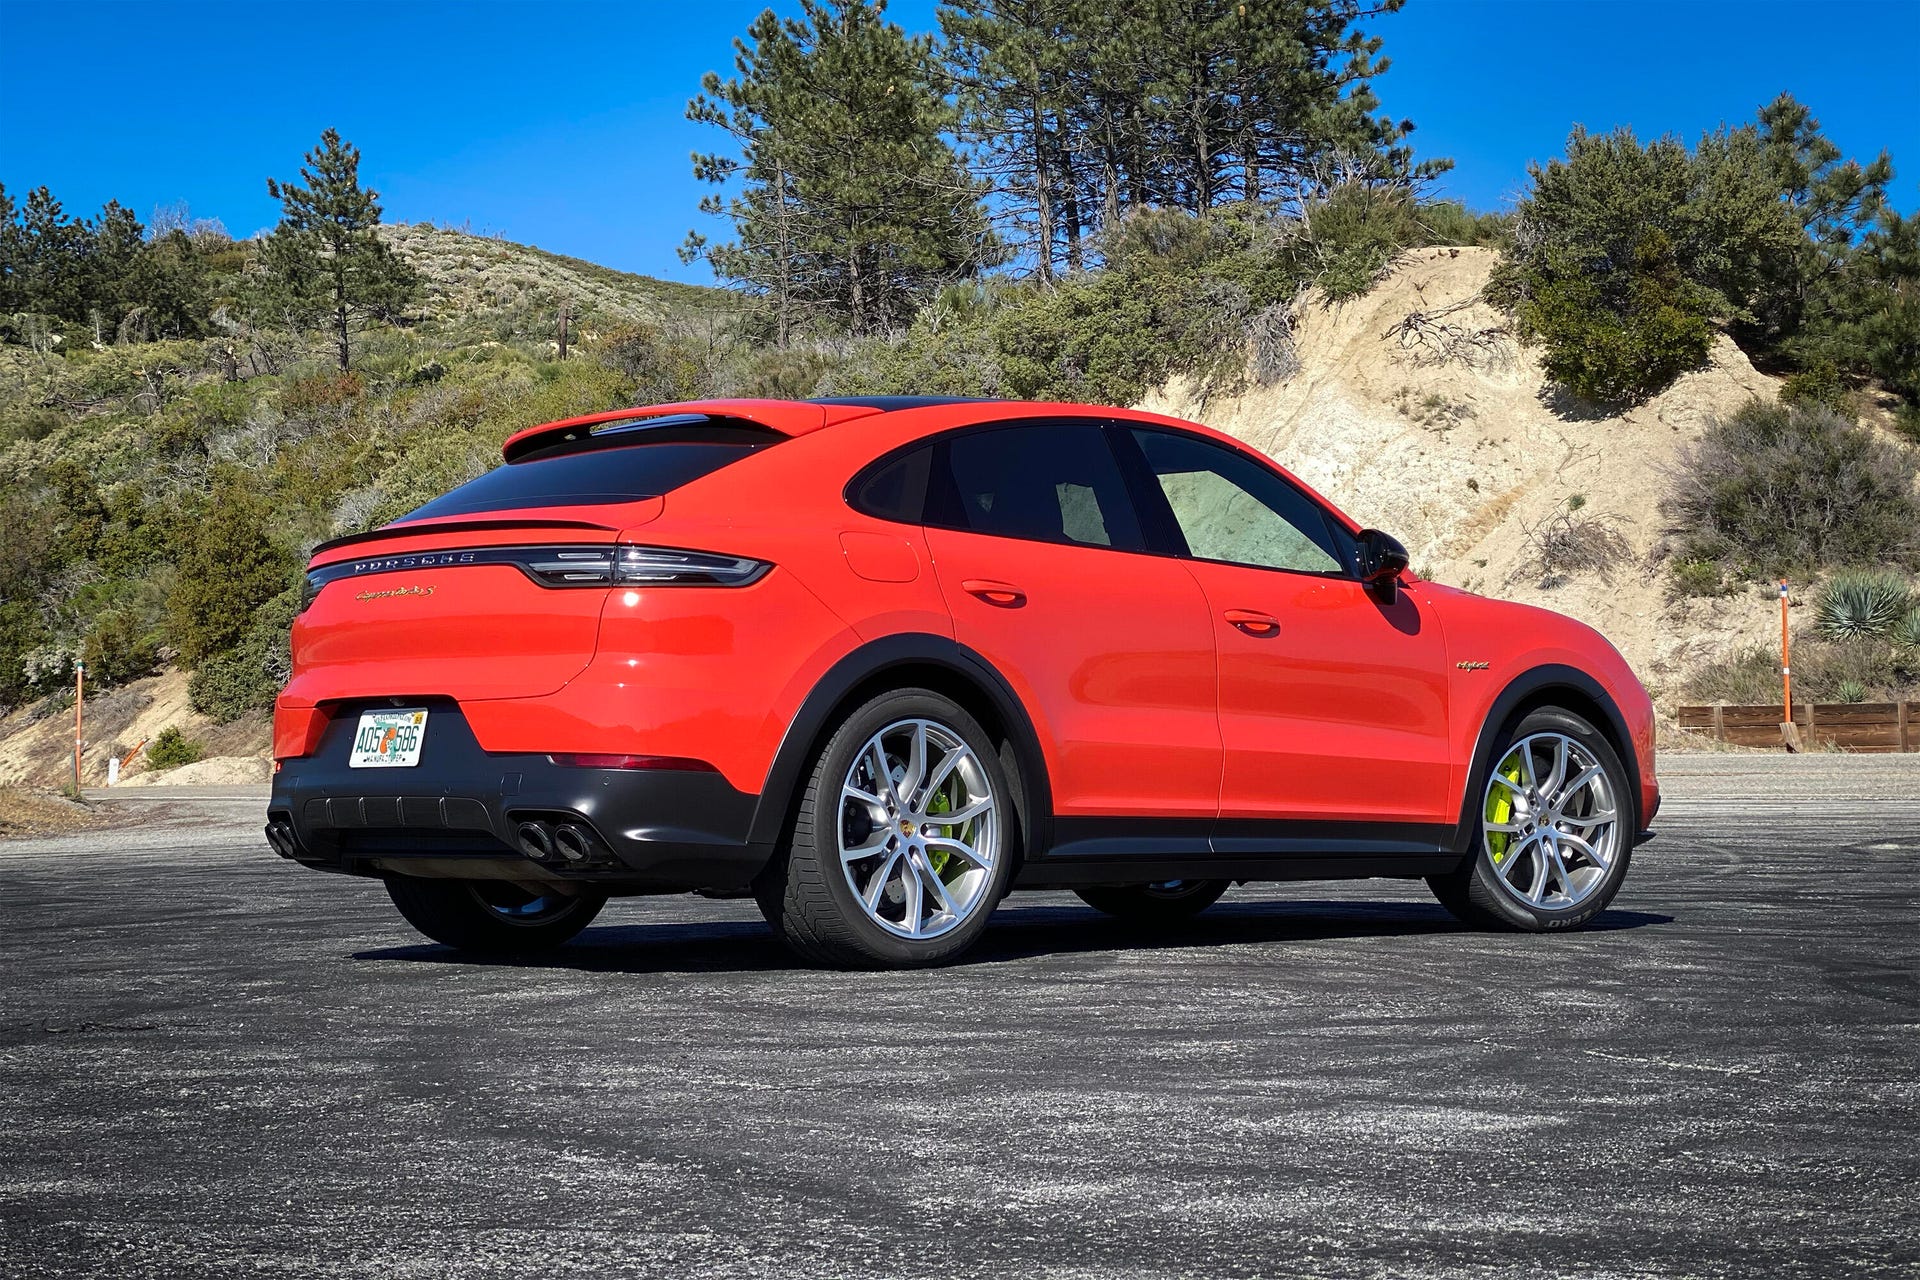 2020 Porsche Cayenne Turbo S E-Hybrid Coupe review: Absurd, but like, in a  good way - CNET